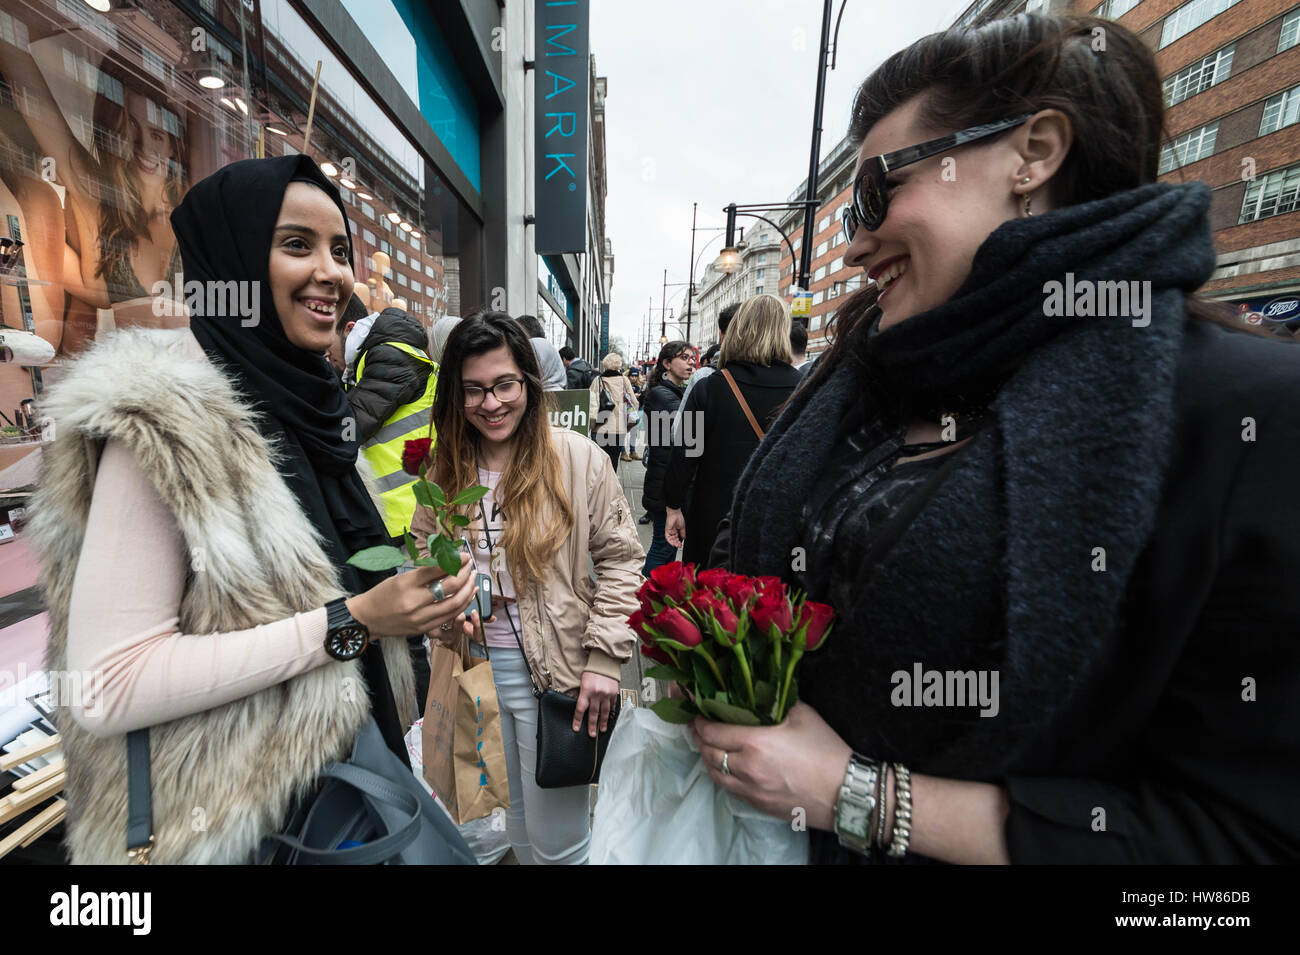 London, UK. 18th March, 2017. British Syrians and supporters march through central London for 6th Anniversary of the Syrian Revolution © Guy Corbishley/Alamy Live News Stock Photo